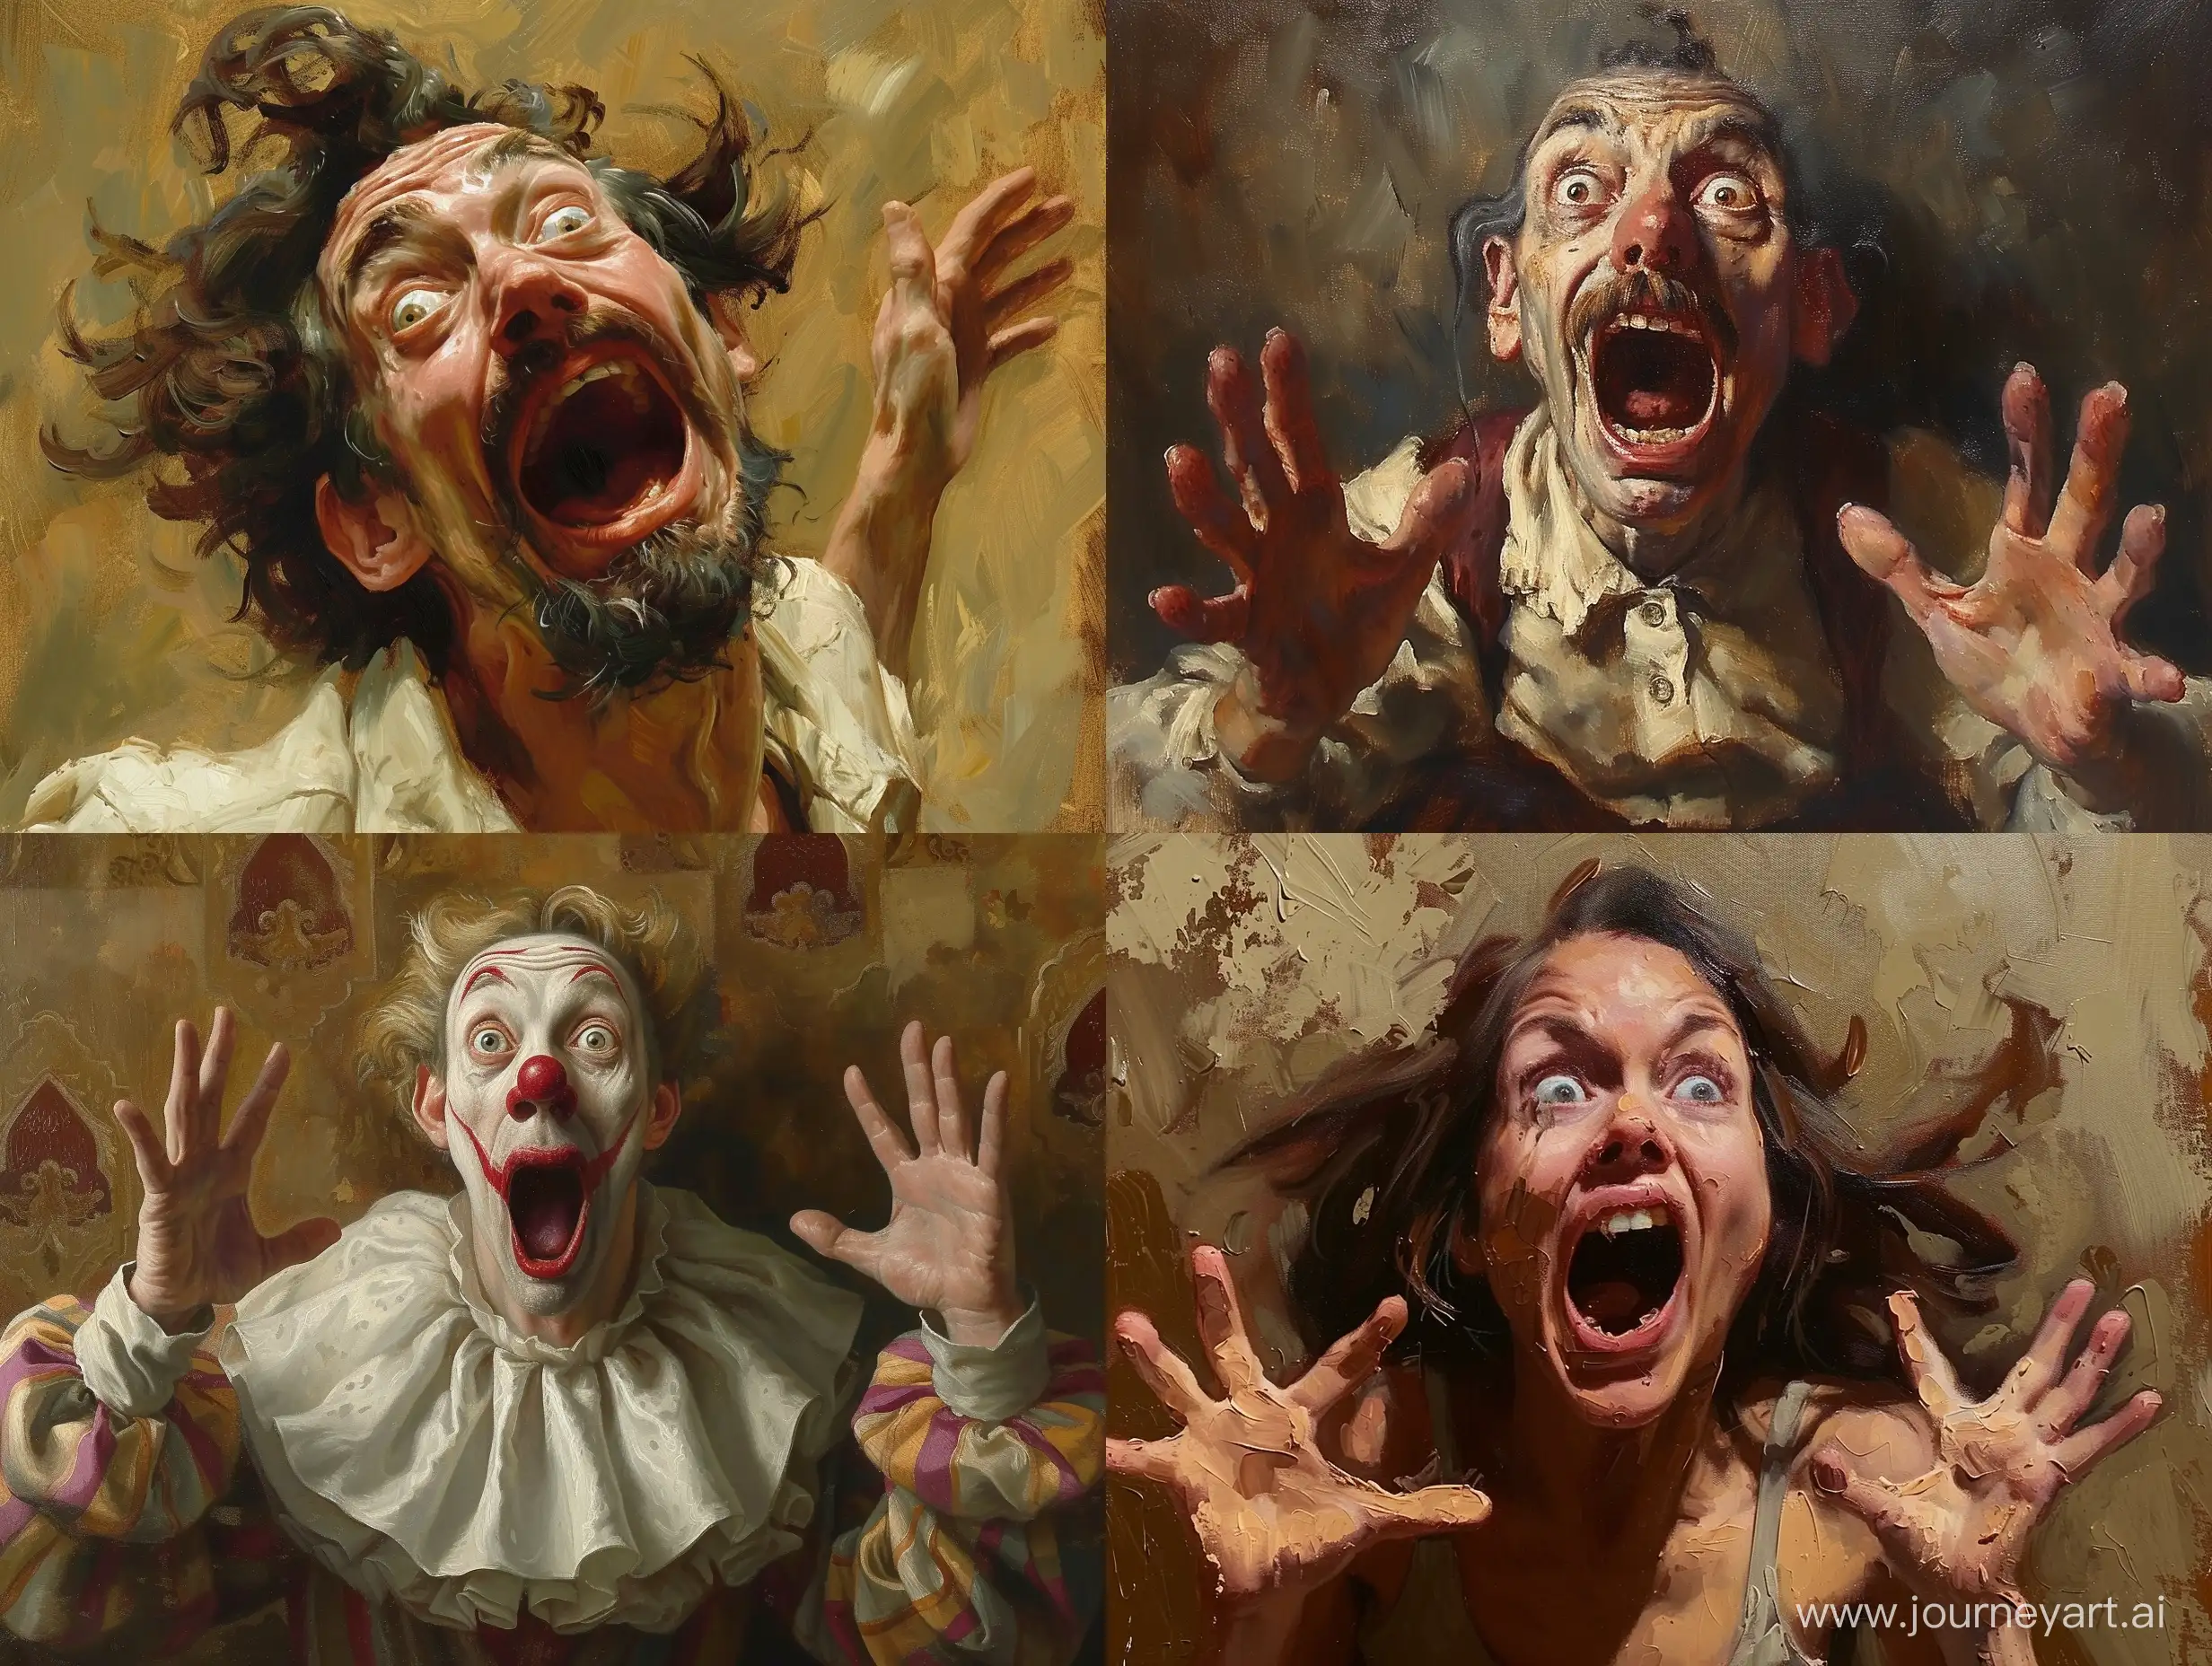 Whimsical-Characters-in-Classical-Oil-Painting-with-Exaggerated-Expressions